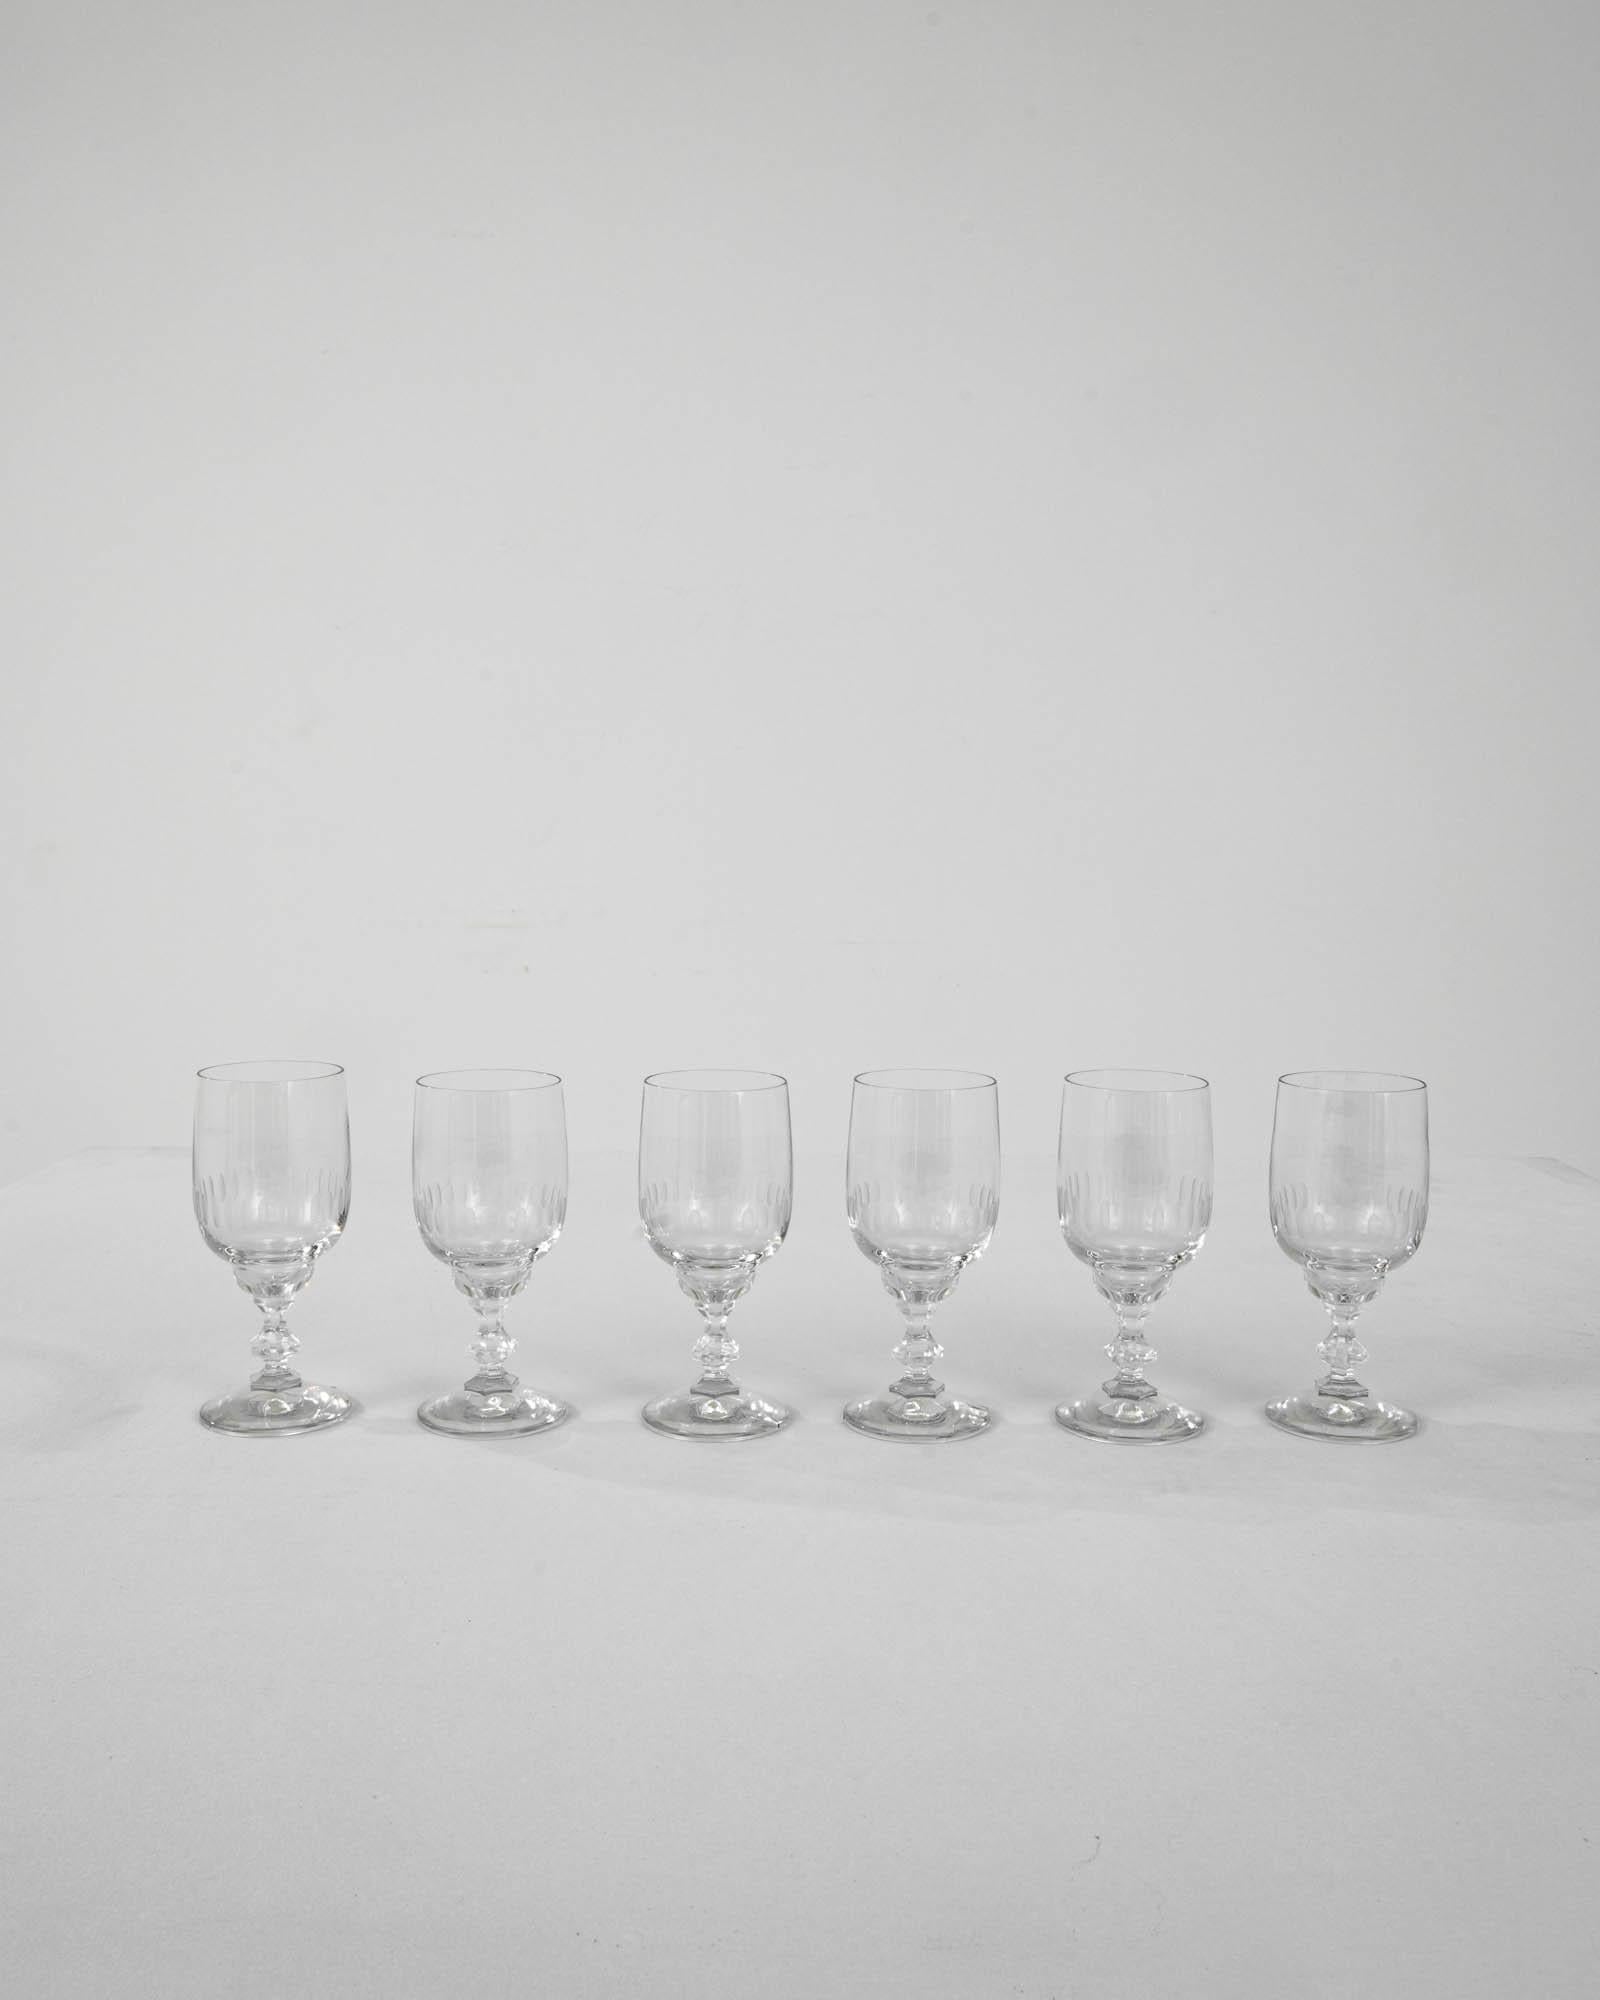 A set of vintage cut crystal glasses from France. Their petite size indicates they were intended for holding fortified wine, such as port or lillet– this French classic would typically be served as an aperitif. The elegant design rests on an